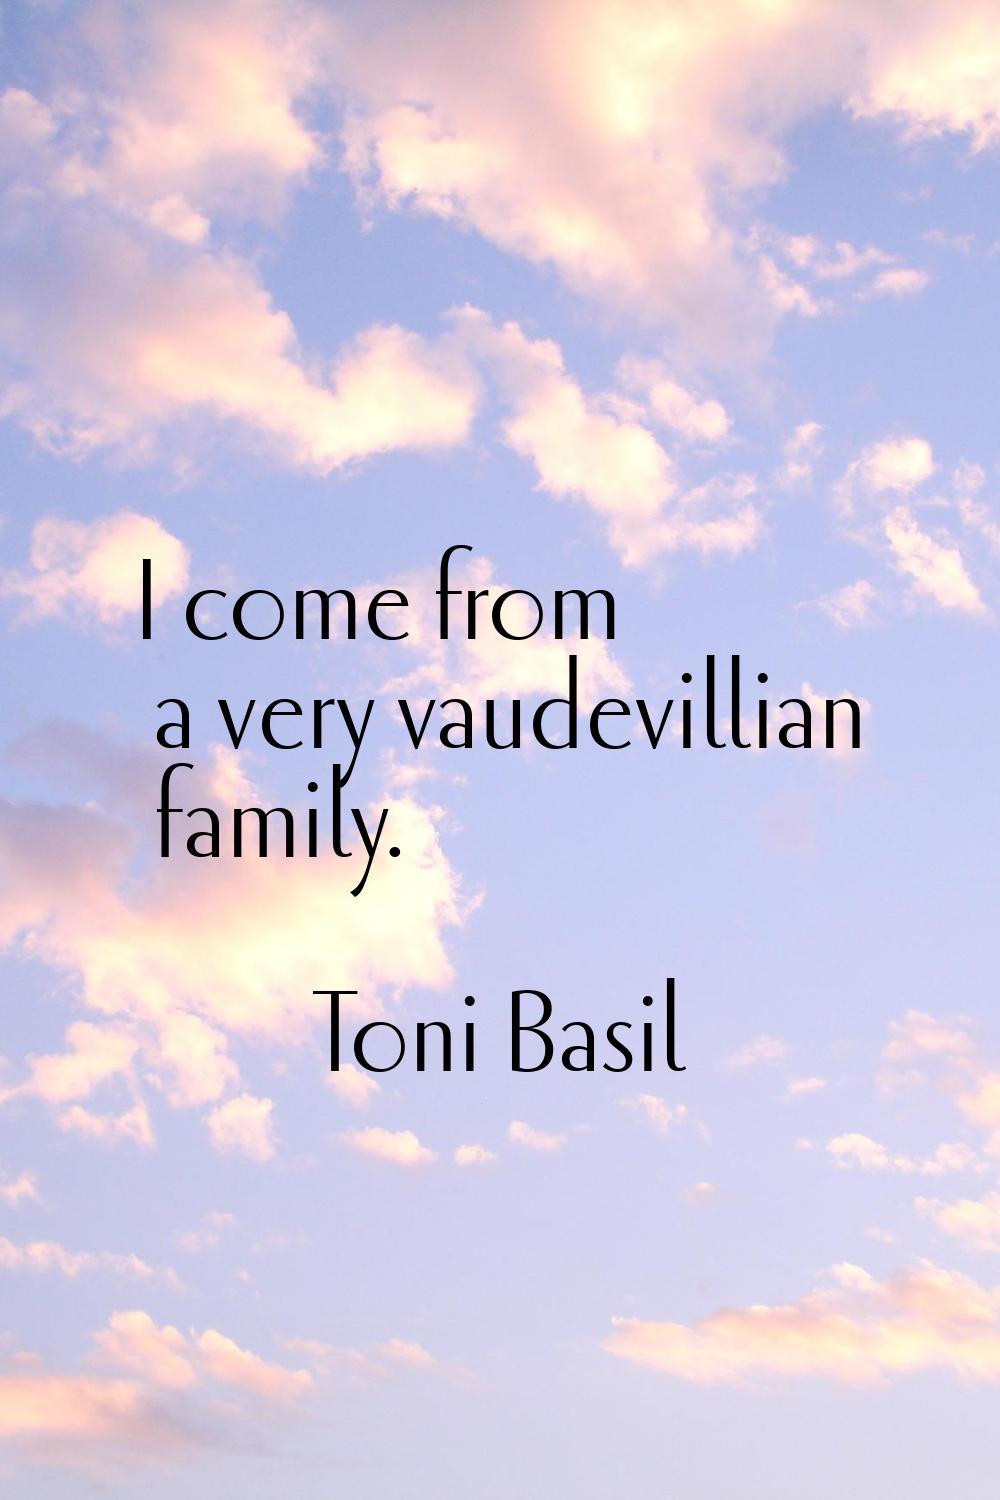 I come from a very vaudevillian family.